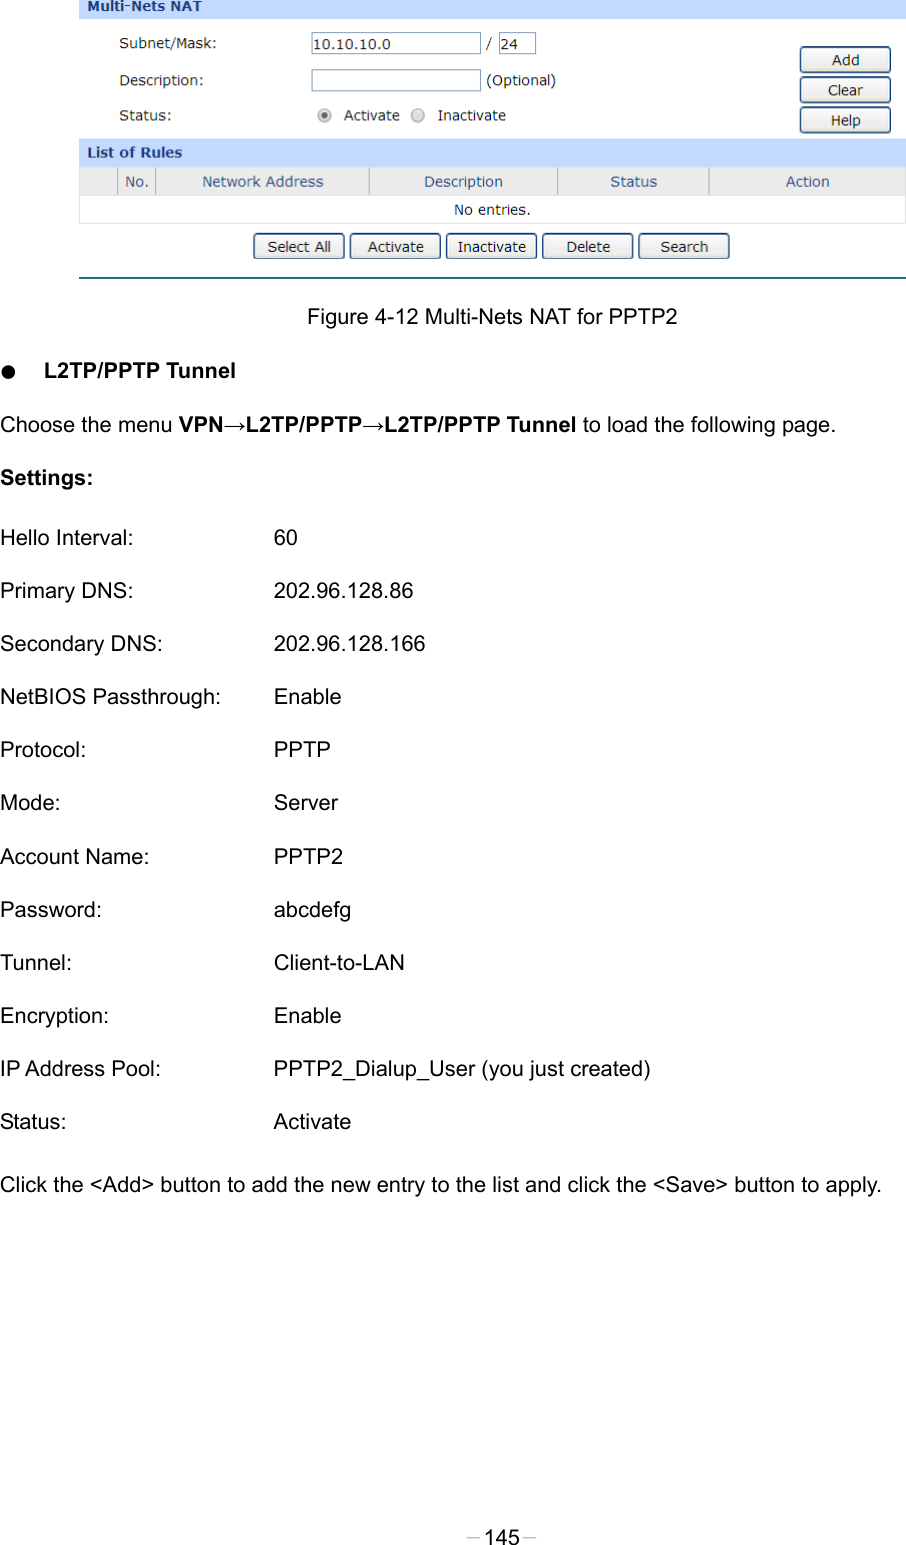   Figure 4-12 Multi-Nets NAT for PPTP2 ● L2TP/PPTP Tunnel Choose the menu VPN→L2TP/PPTP→L2TP/PPTP Tunnel to load the following page. Settings: Hello Interval: 60 Primary DNS: 202.96.128.86 Secondary DNS: 202.96.128.166 NetBIOS Passthrough: Enable Protocol: PPTP Mode:  Server Account Name:  PPTP2 Password: abcdefg Tunnel: Client-to-LAN Encryption: Enable IP Address Pool: PPTP2_Dialup_User (you just created) Status: Activate Click the &lt;Add&gt; button to add the new entry to the list and click the &lt;Save&gt; button to apply. -145- 